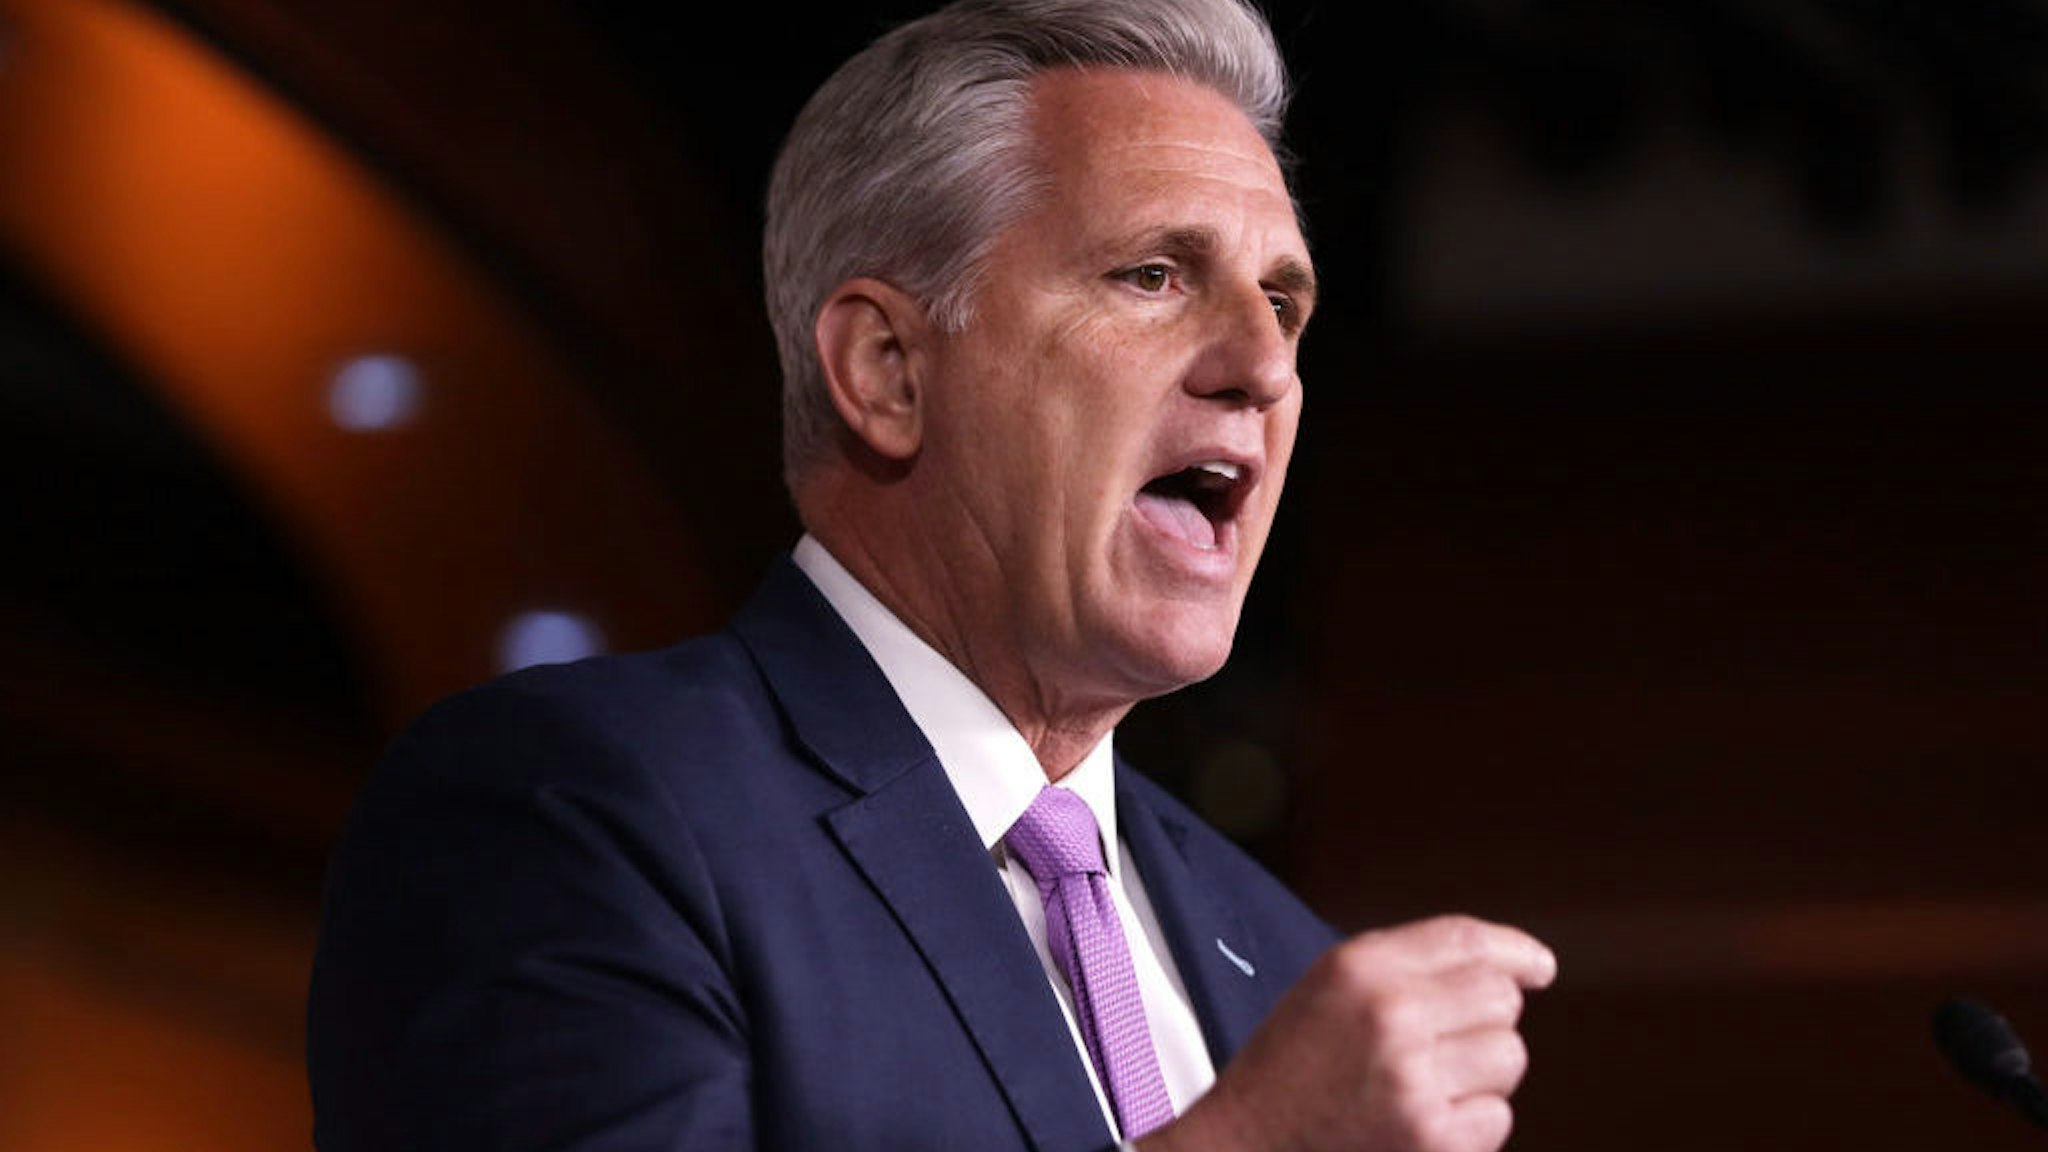 WASHINGTON, DC - DECEMBER 05: U.S. House Minority Leader Rep. Kevin McCarthy (R-CA) speaks during his weekly news conference December 5, 2019 on Capitol Hill in Washington, DC. McCarthy discussed the impeachment inquiry against President Donald Trump. (Photo by Alex Wong/Getty Images)